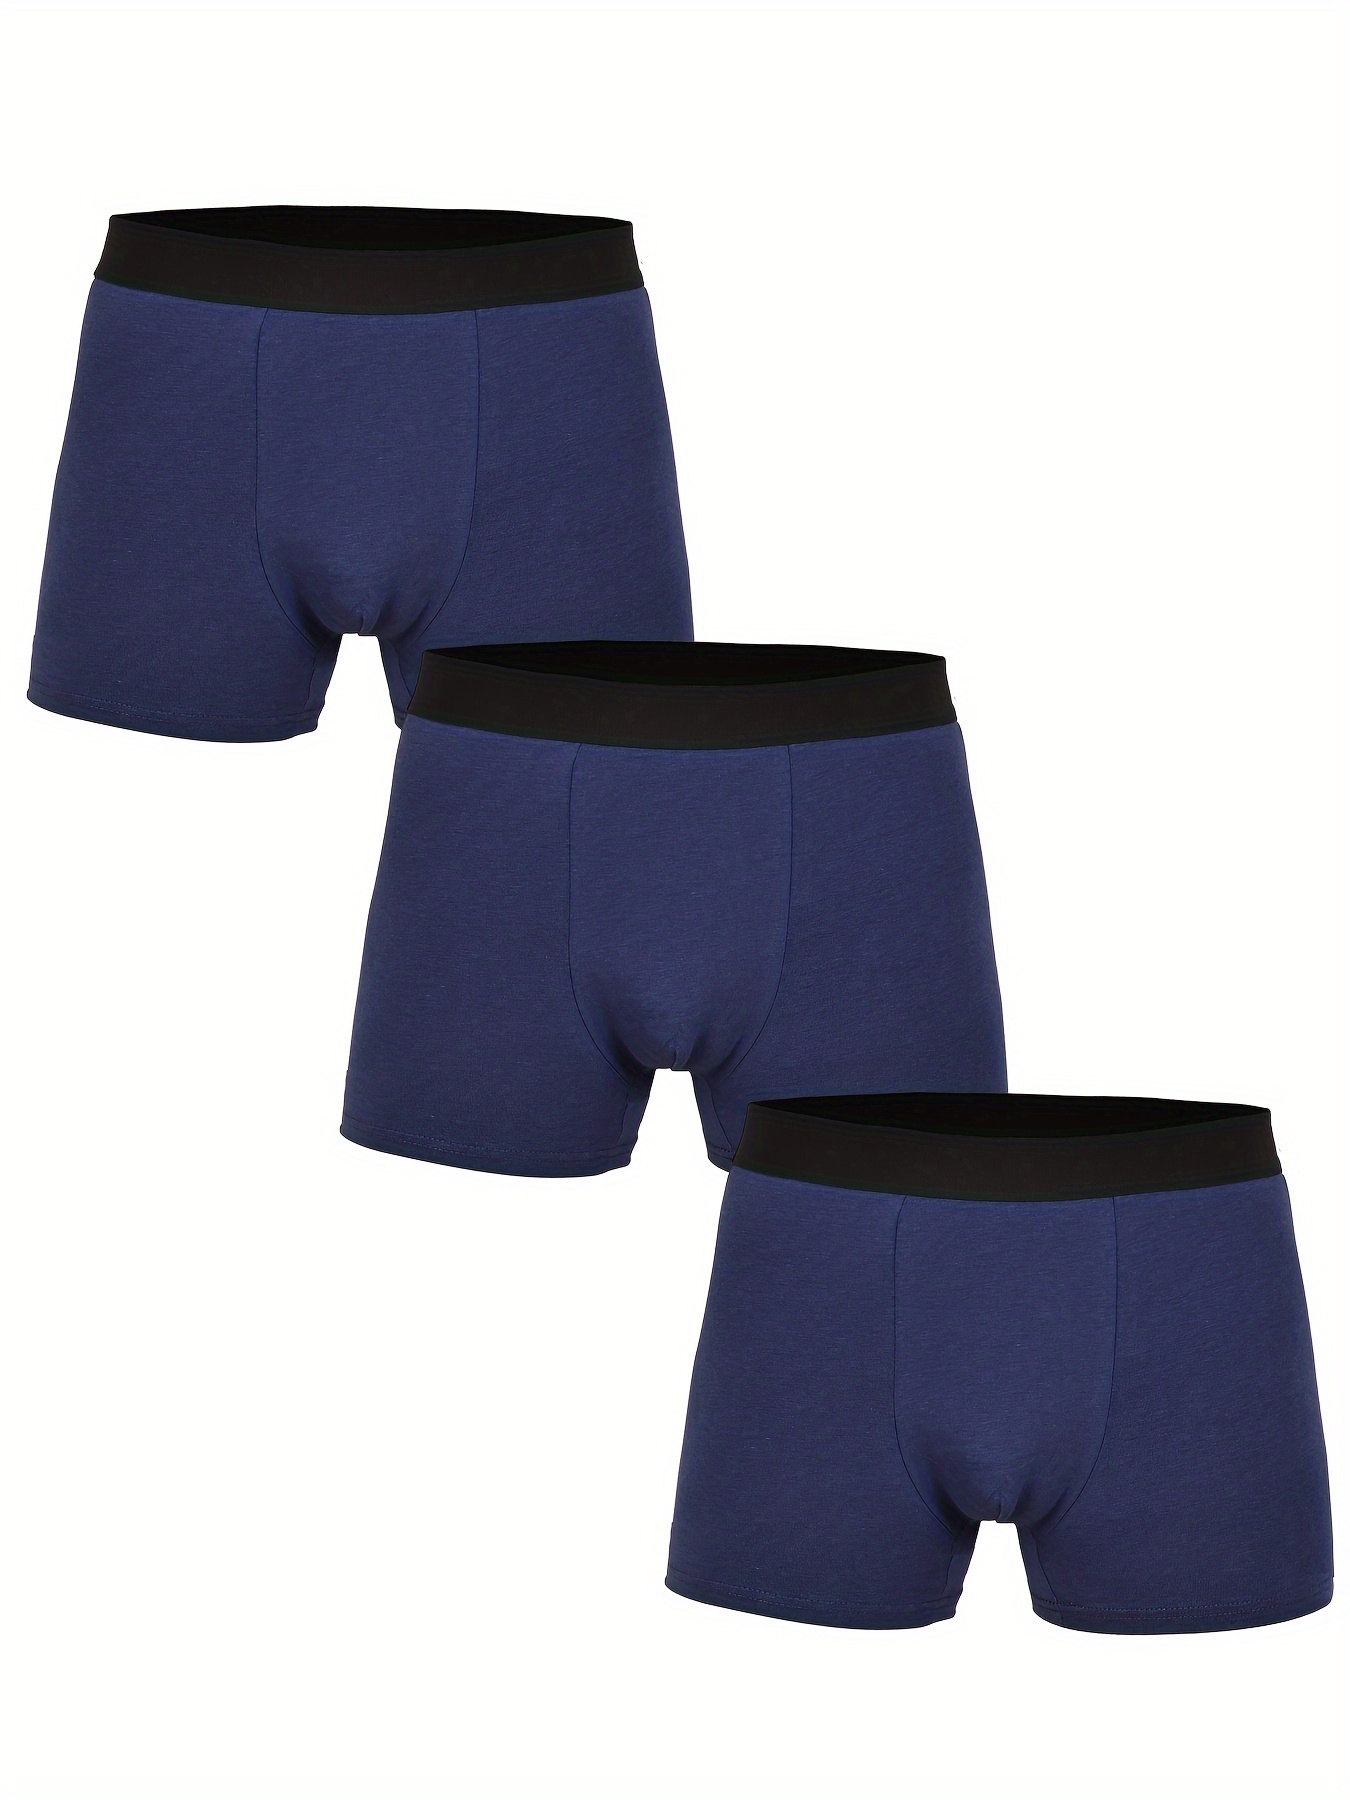 Boxers Shorts For Men